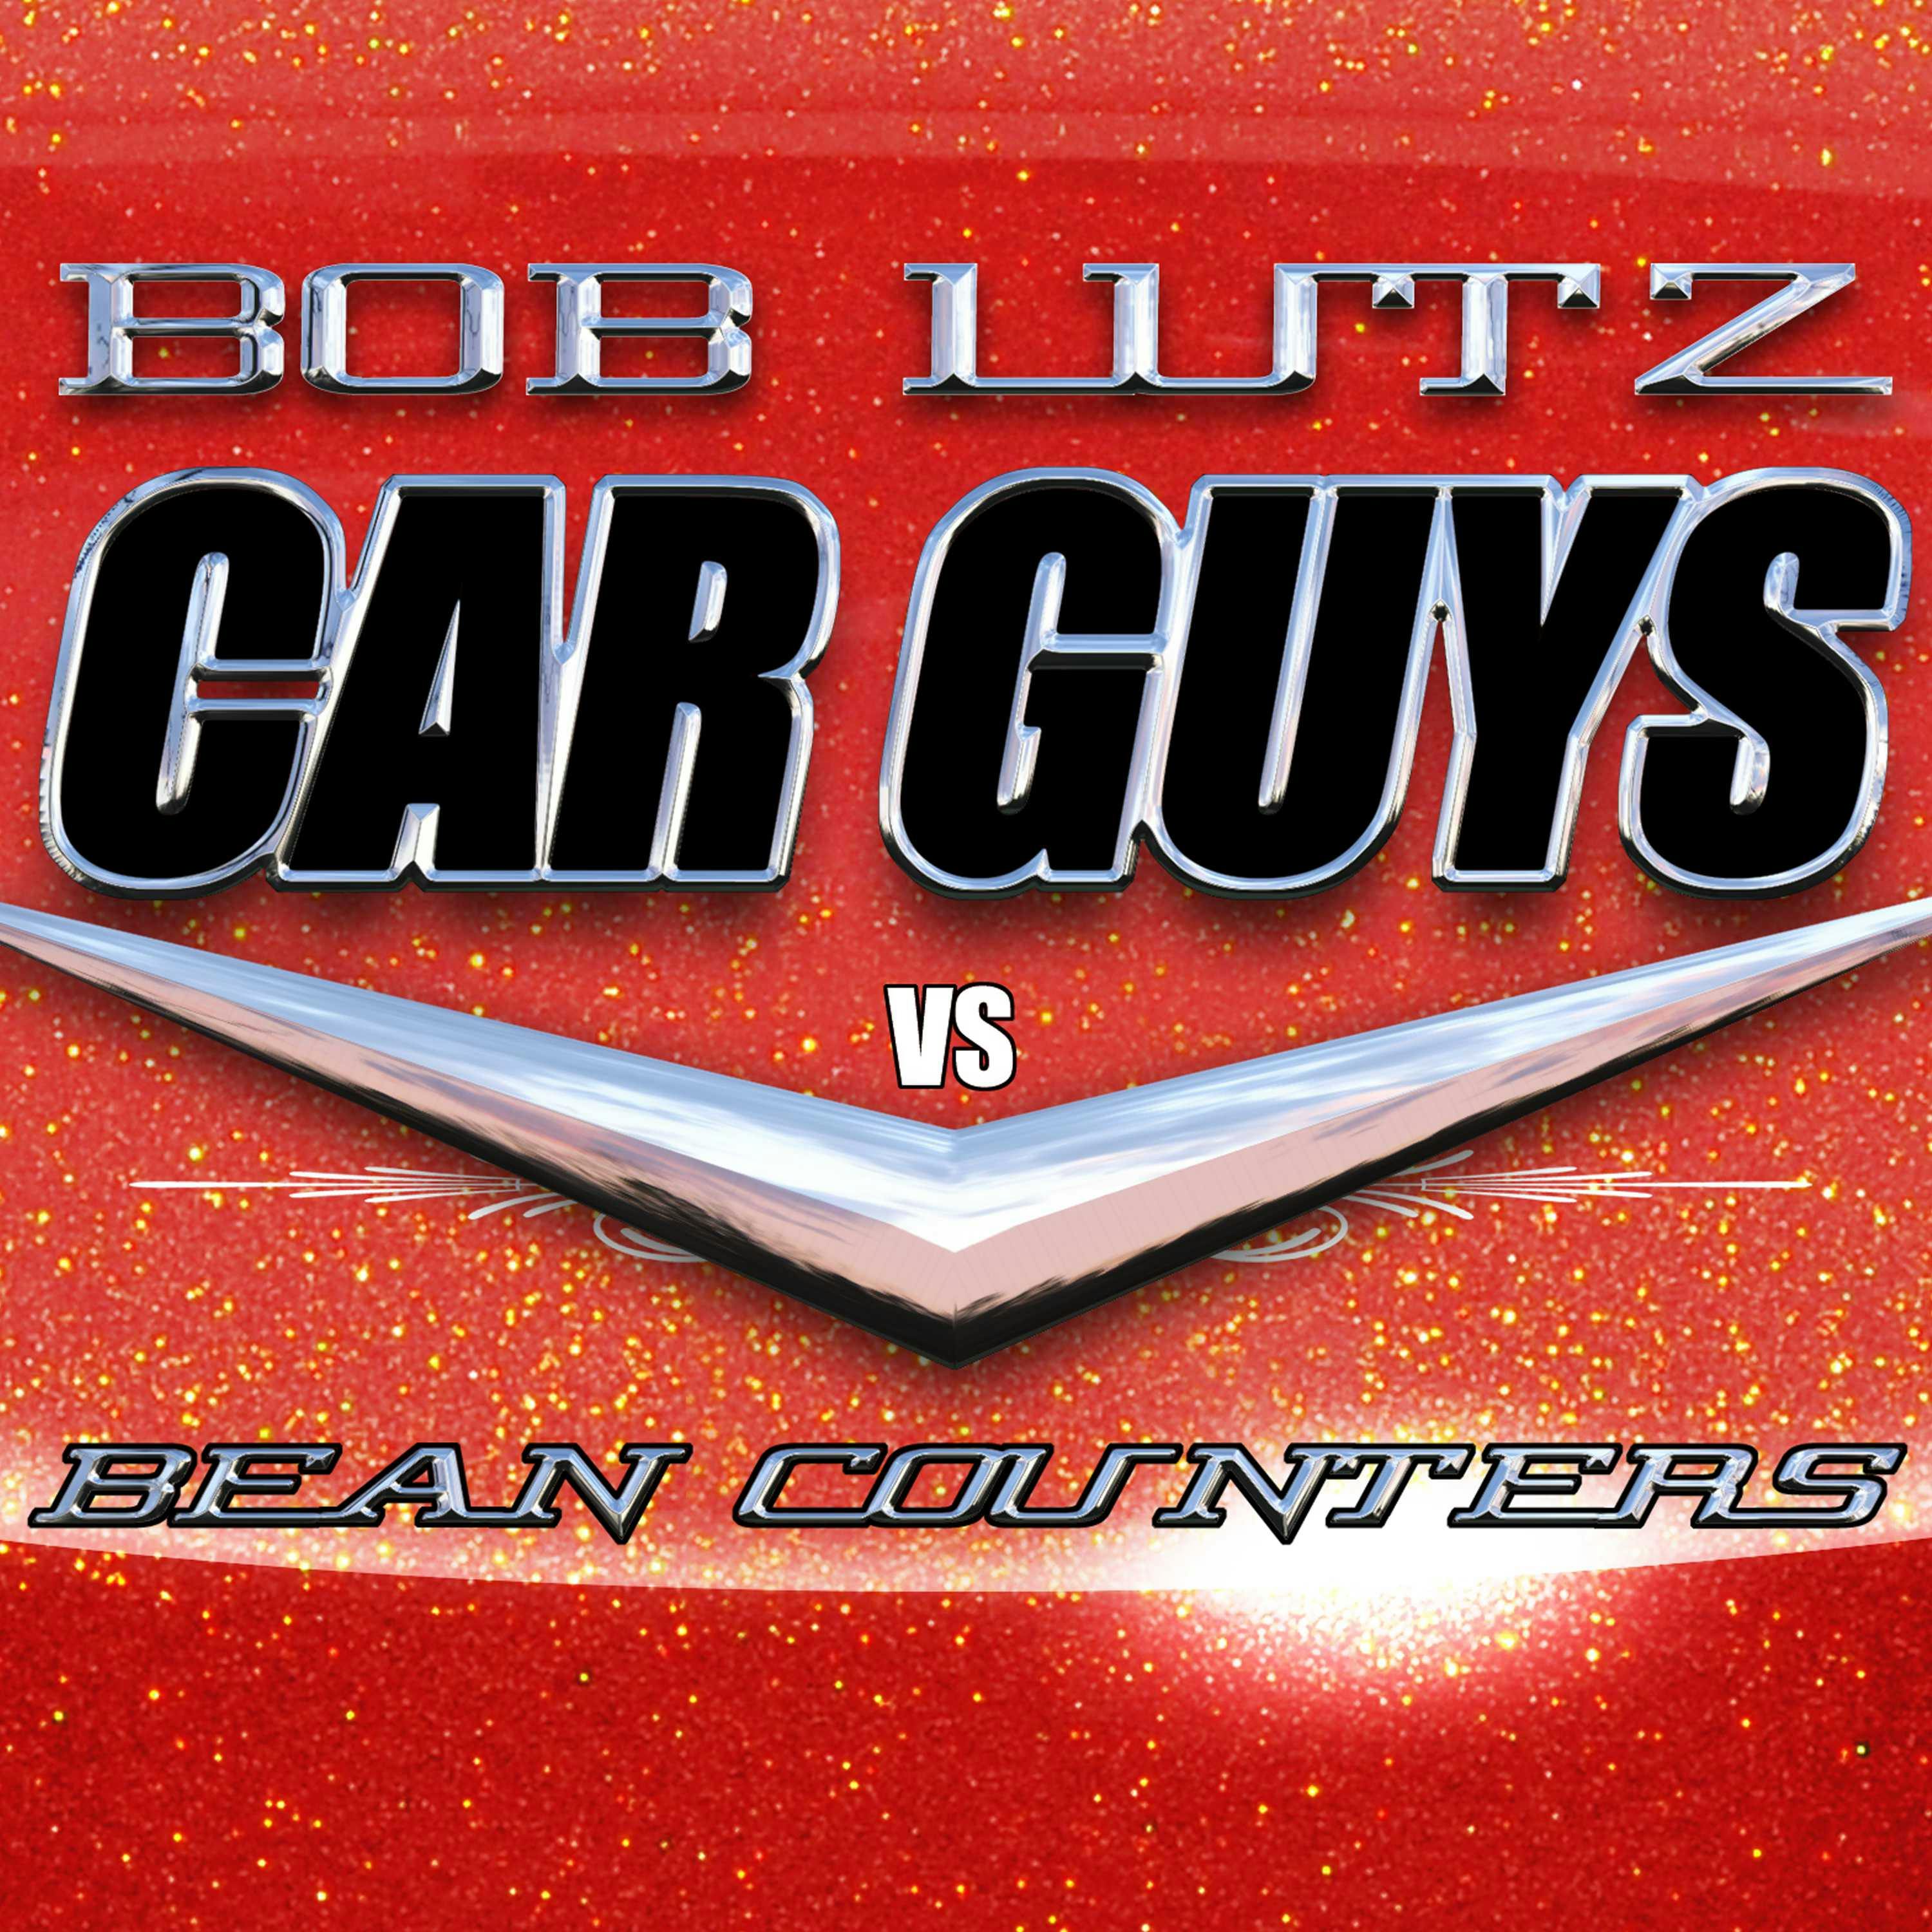 Car Guys vs. Bean Counters: The Battle for the Soul of American Business - Bob Lutz